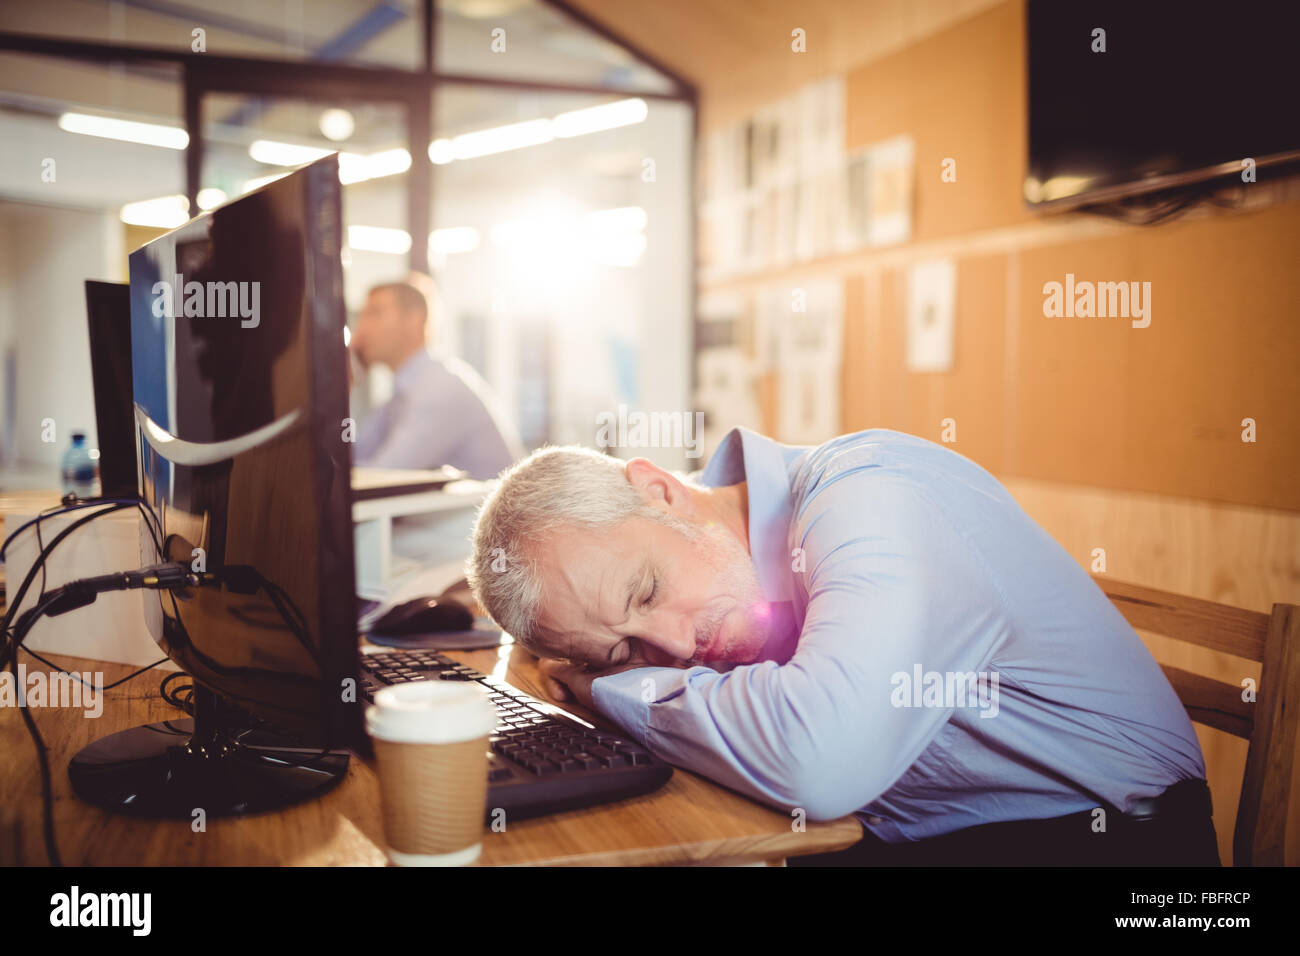 Tired Businessman Falling Asleep On His Desk Stock Photo 93160726